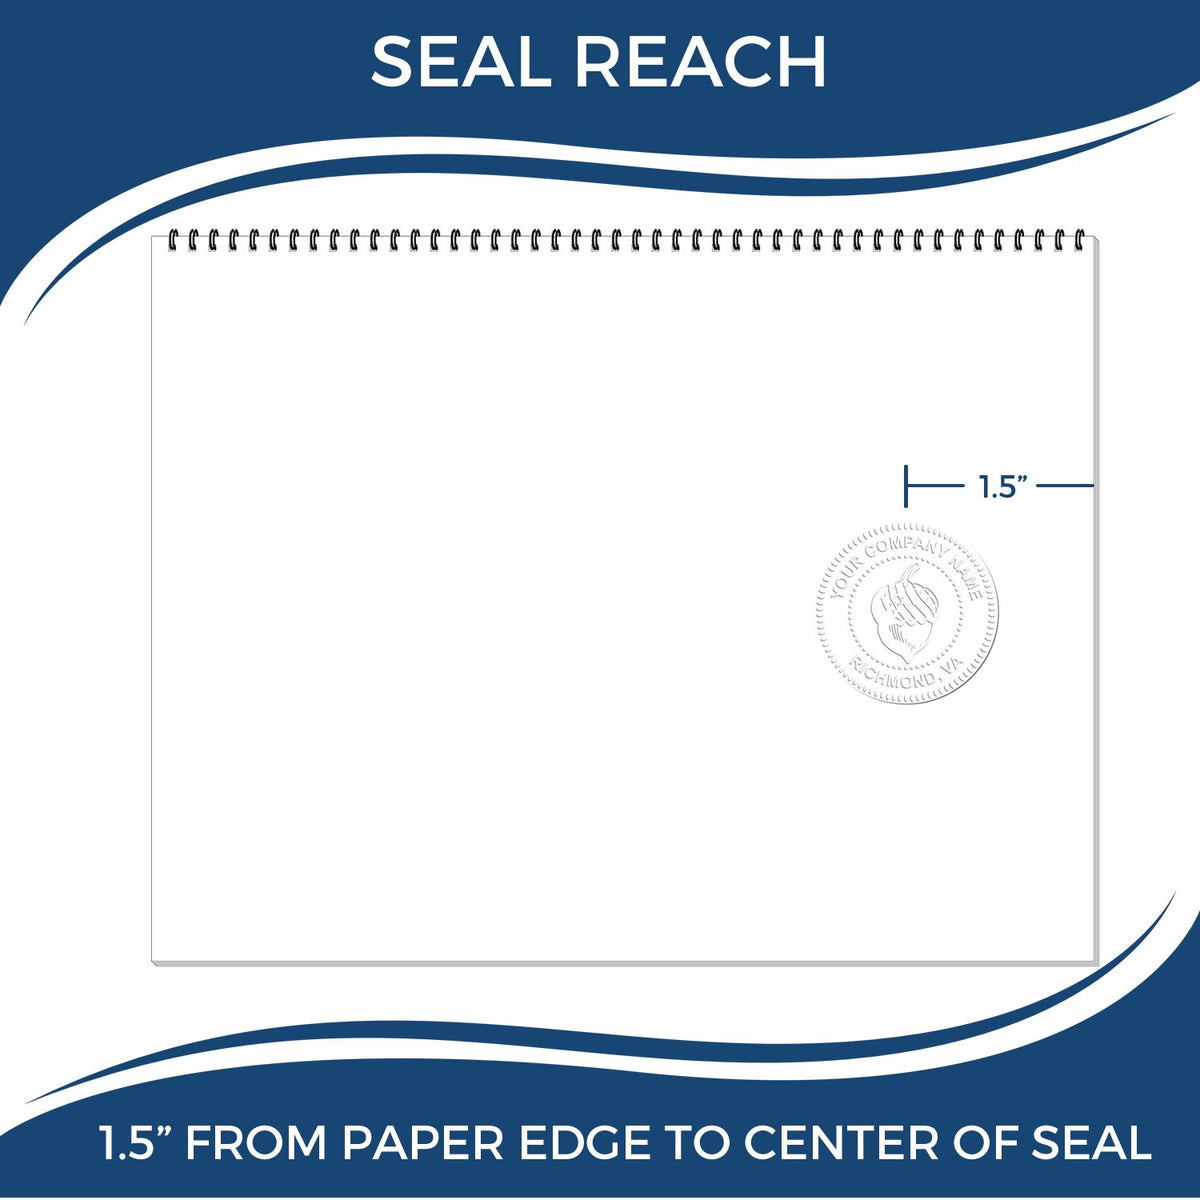 An infographic showing the seal reach which is represented by a ruler and a miniature seal image of the Handheld Colorado Land Surveyor Seal